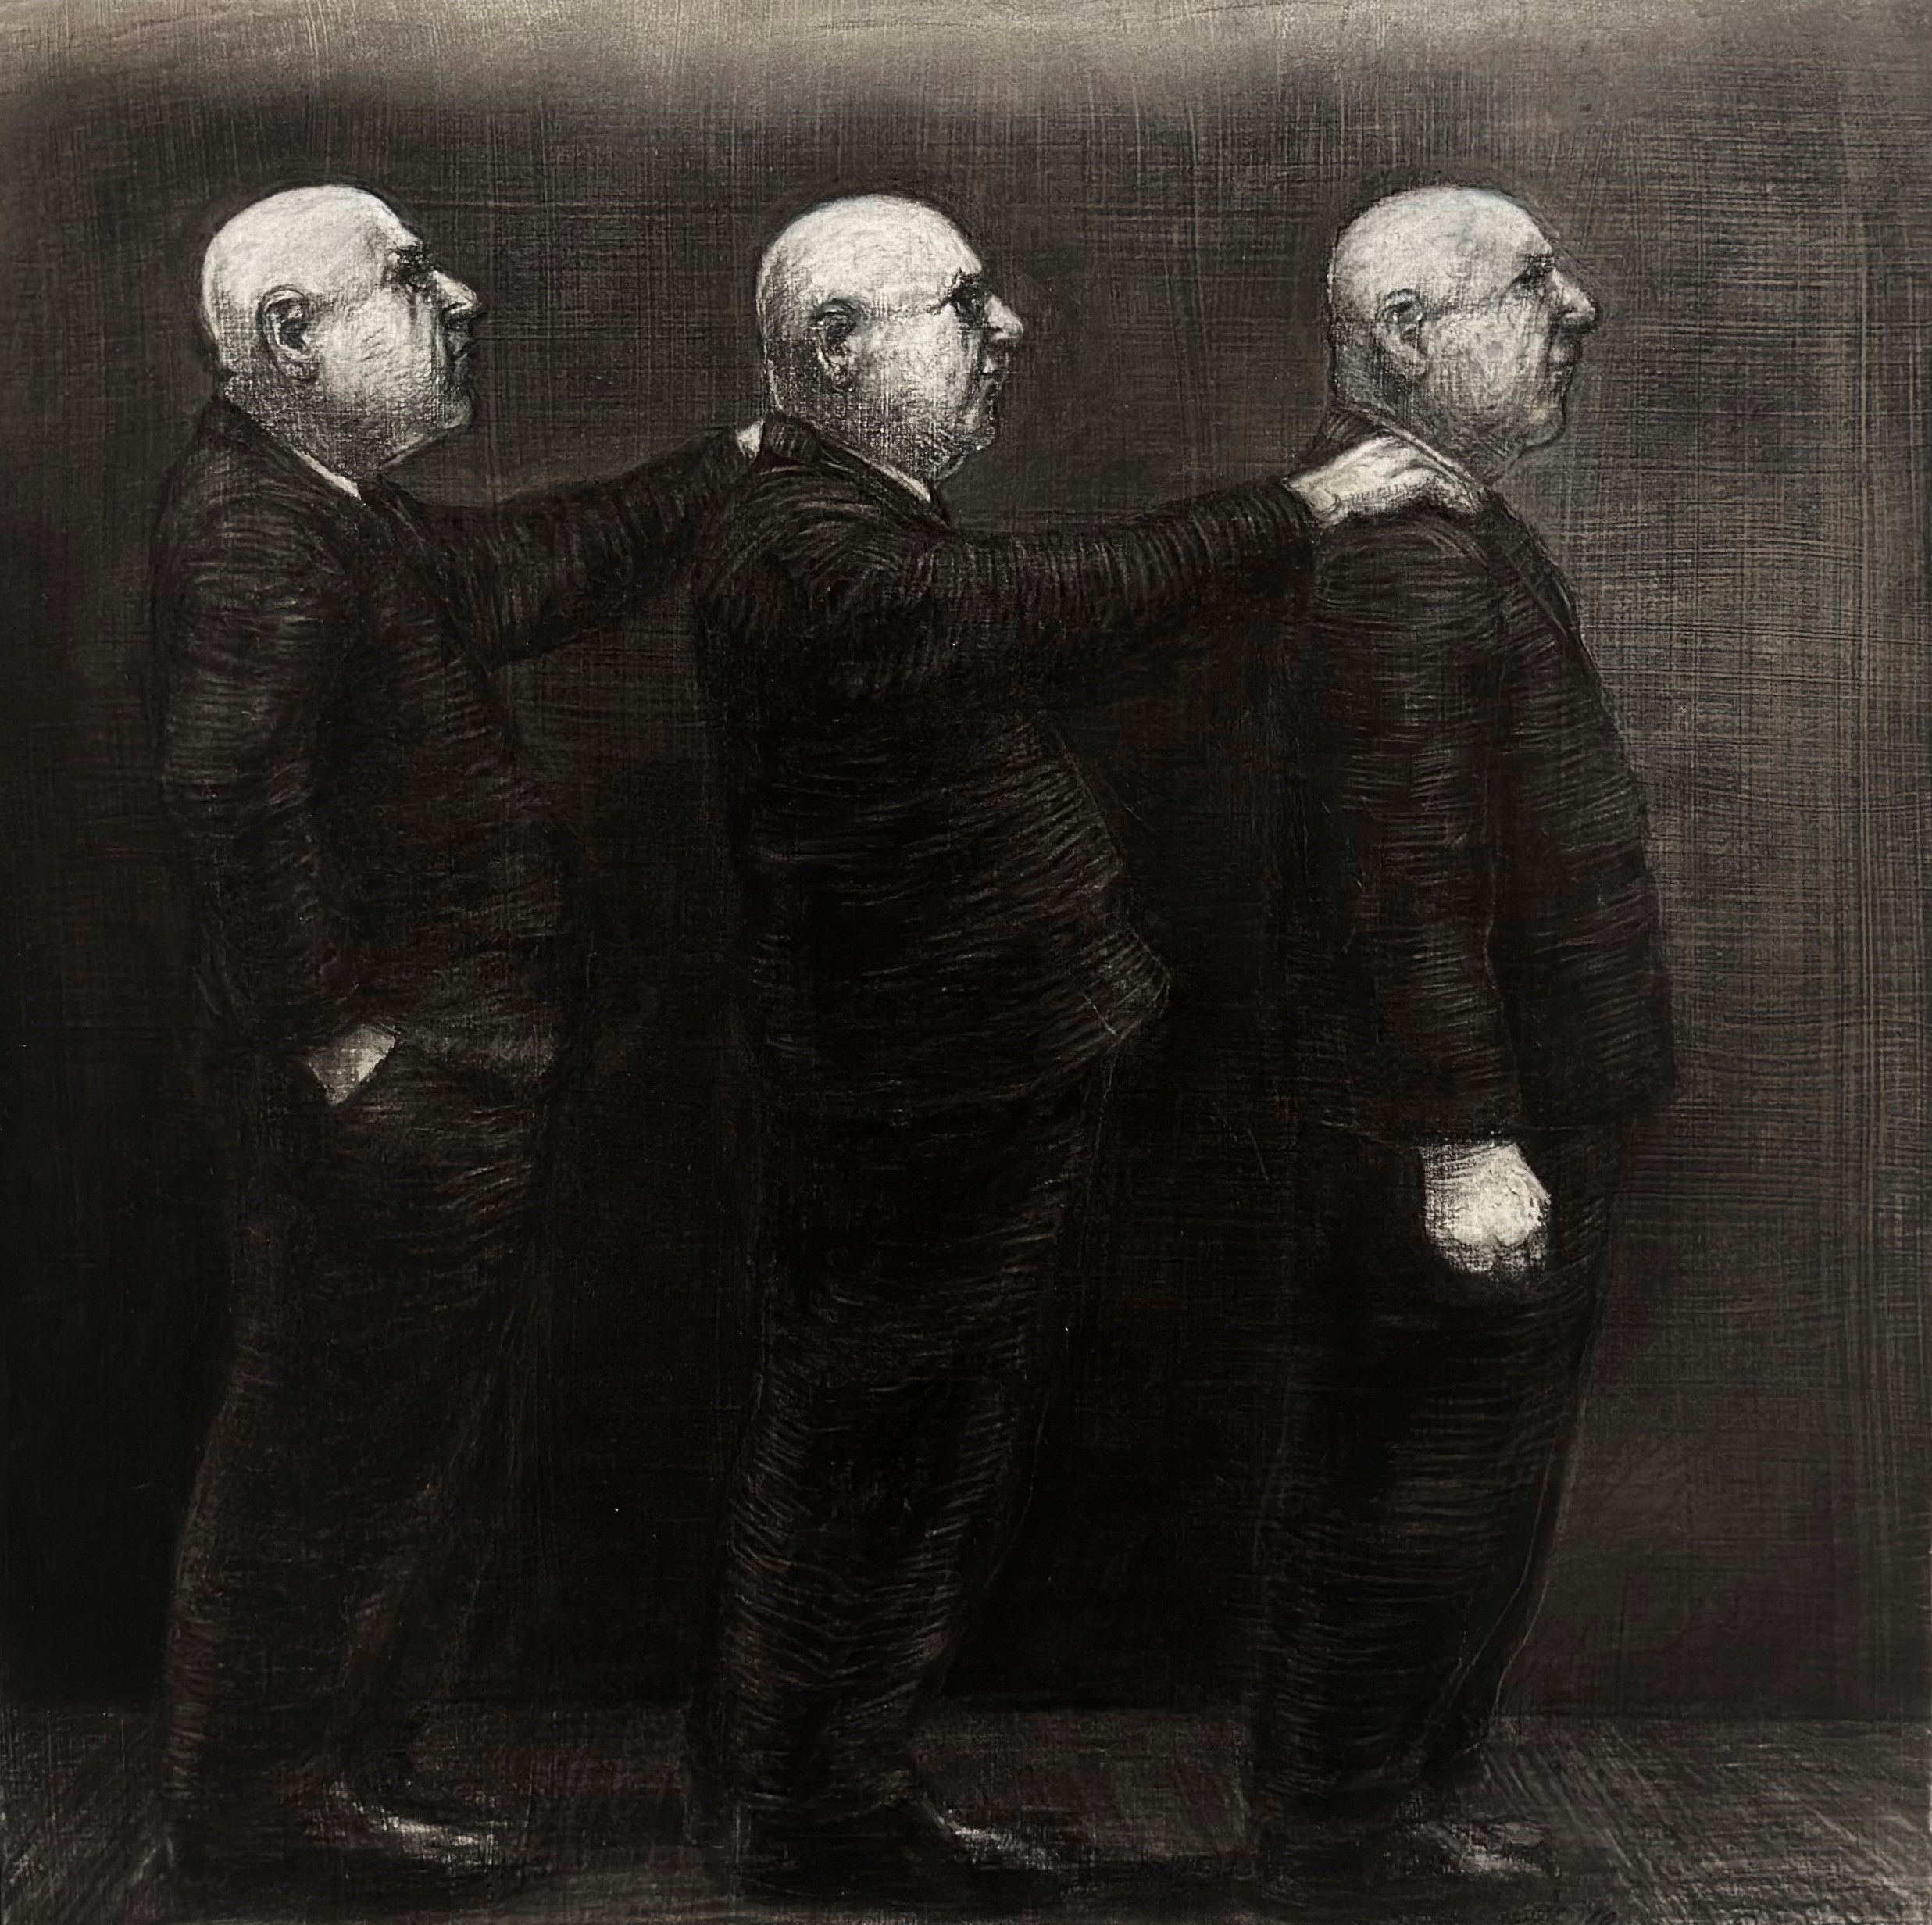 Christopher Orchard 'Arms Length' charcoal on gesso on wood panel 40 x 40cm $3,500